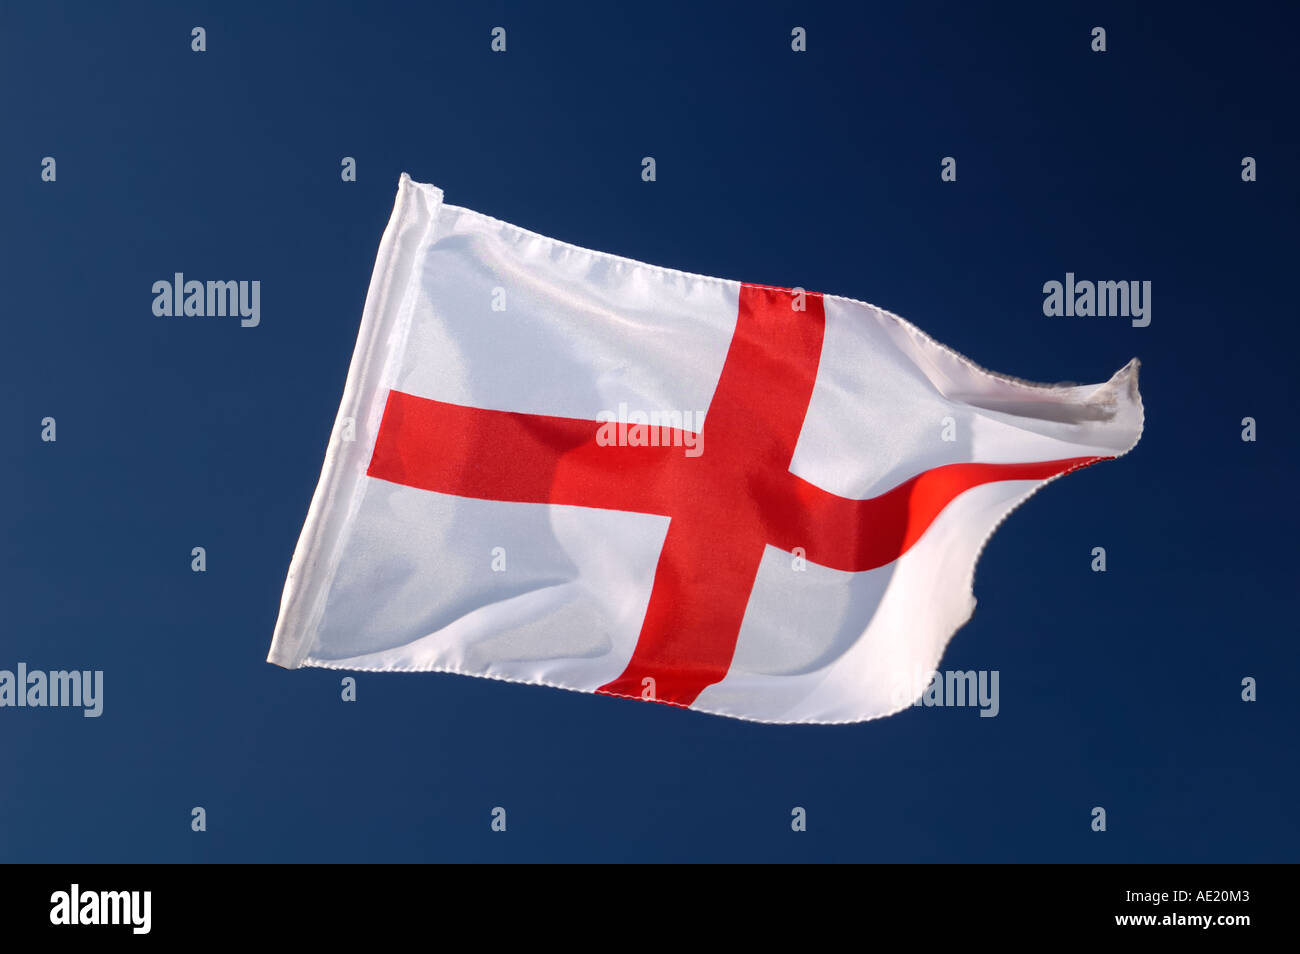 The English flag against a dark blue background Stock Photo